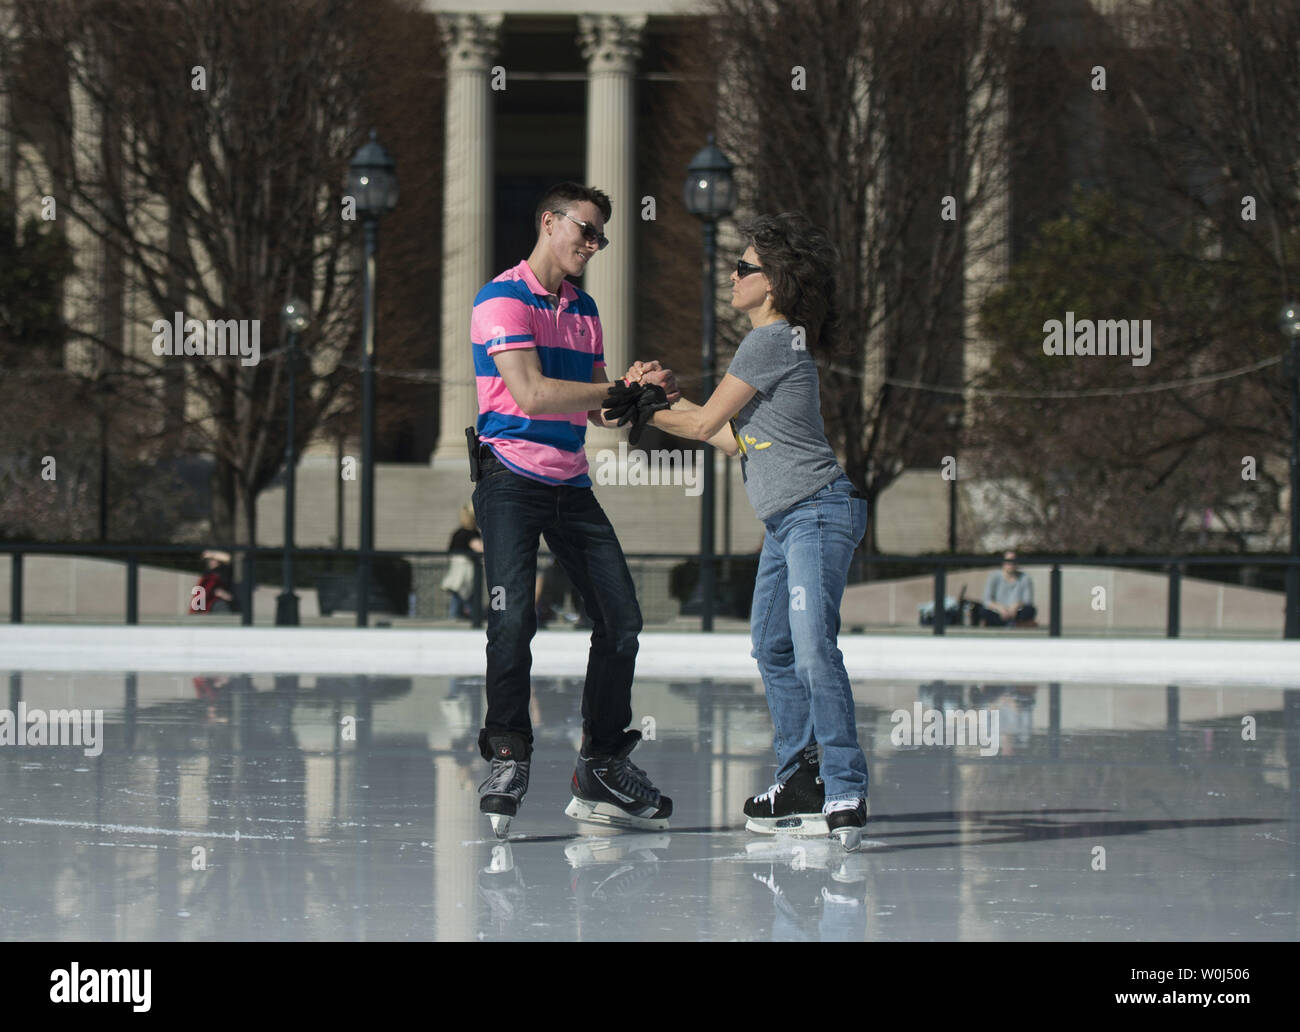 People Ice Skate As Temperatures Climb Into The Mid 70 S At The